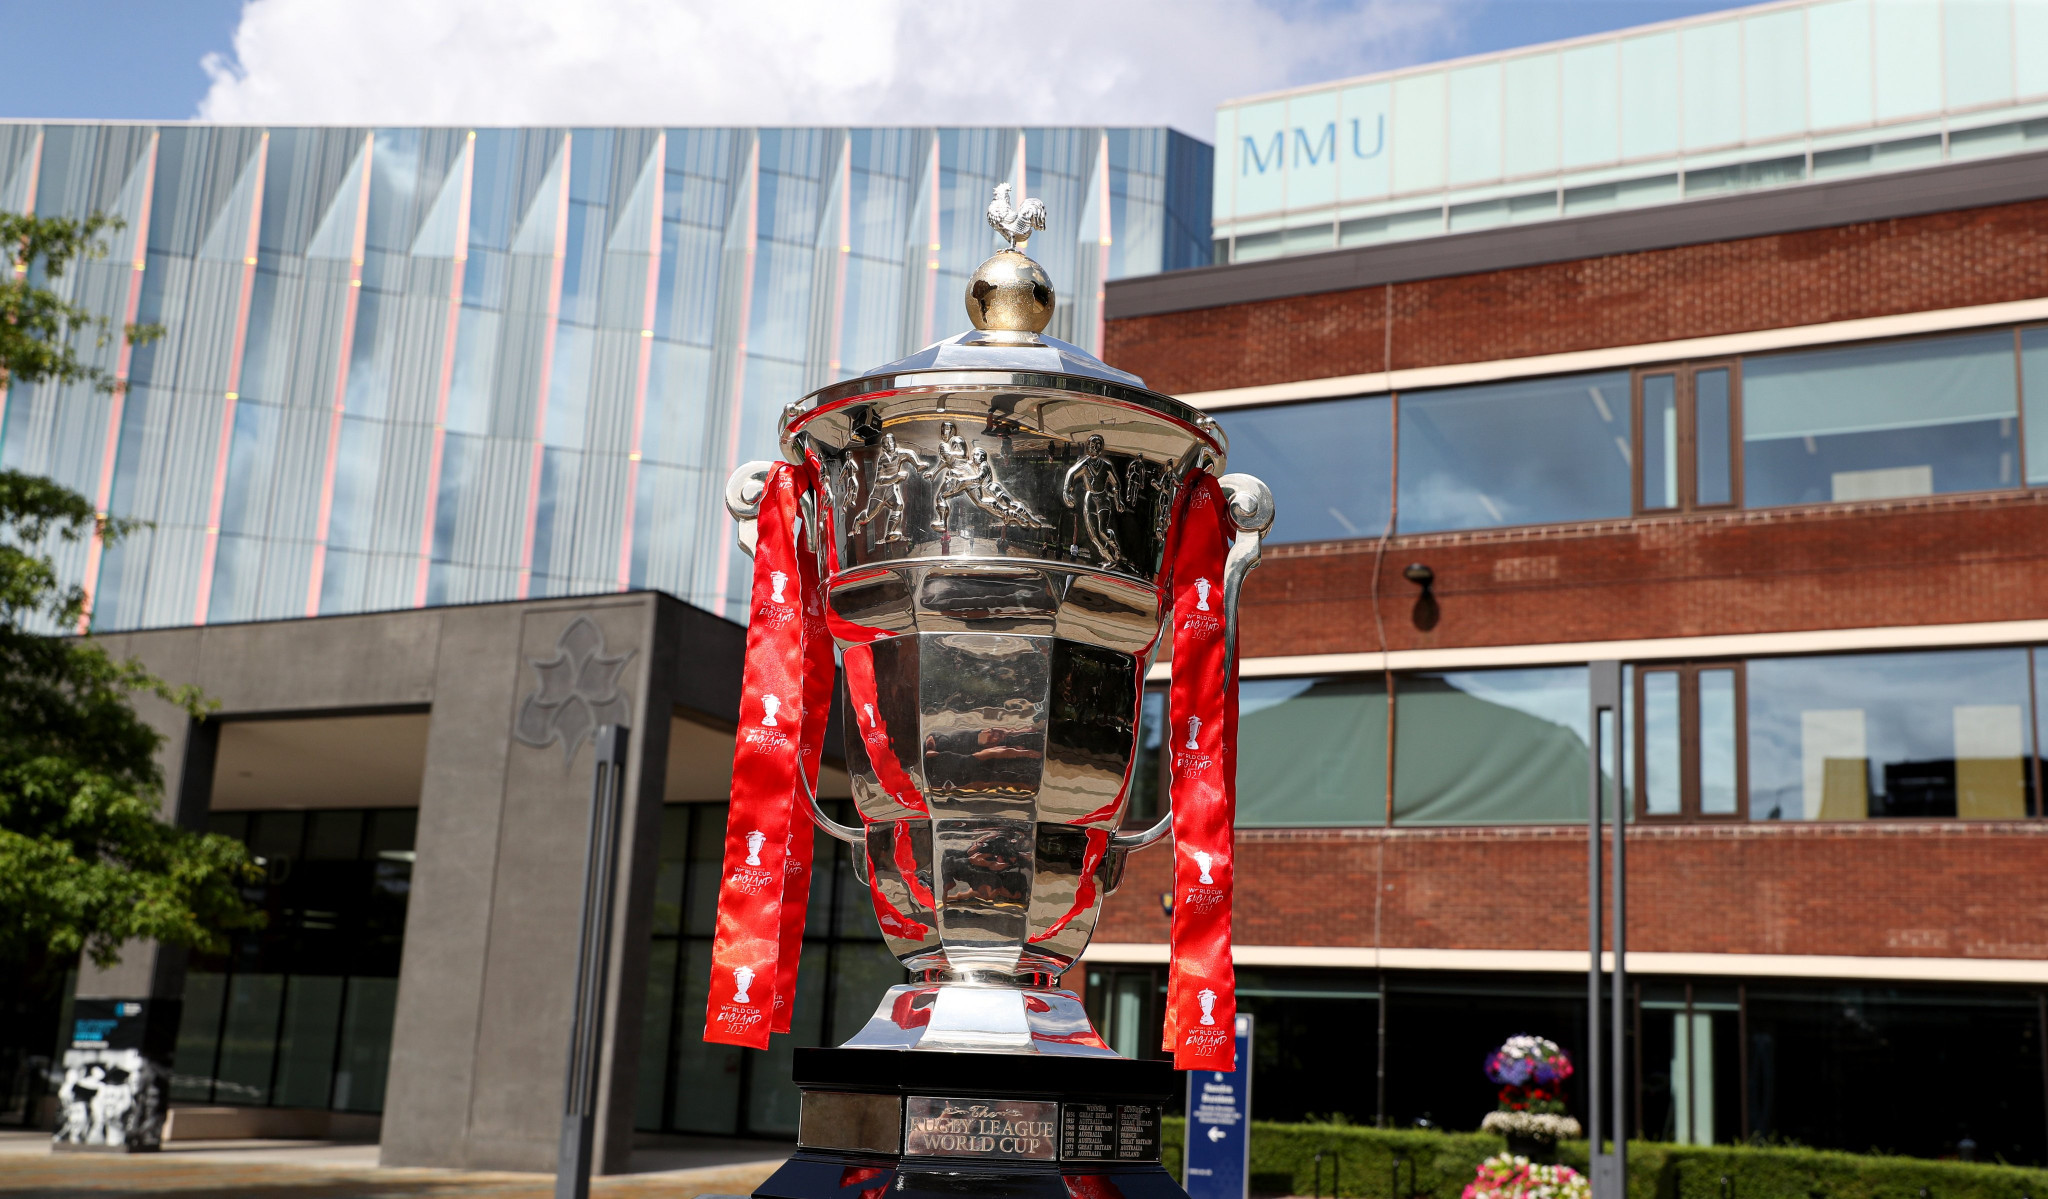 IRL chief executive Nigel Wood discussed preparations for the Rugby League World Cup in 2021 in England ©Getty Images